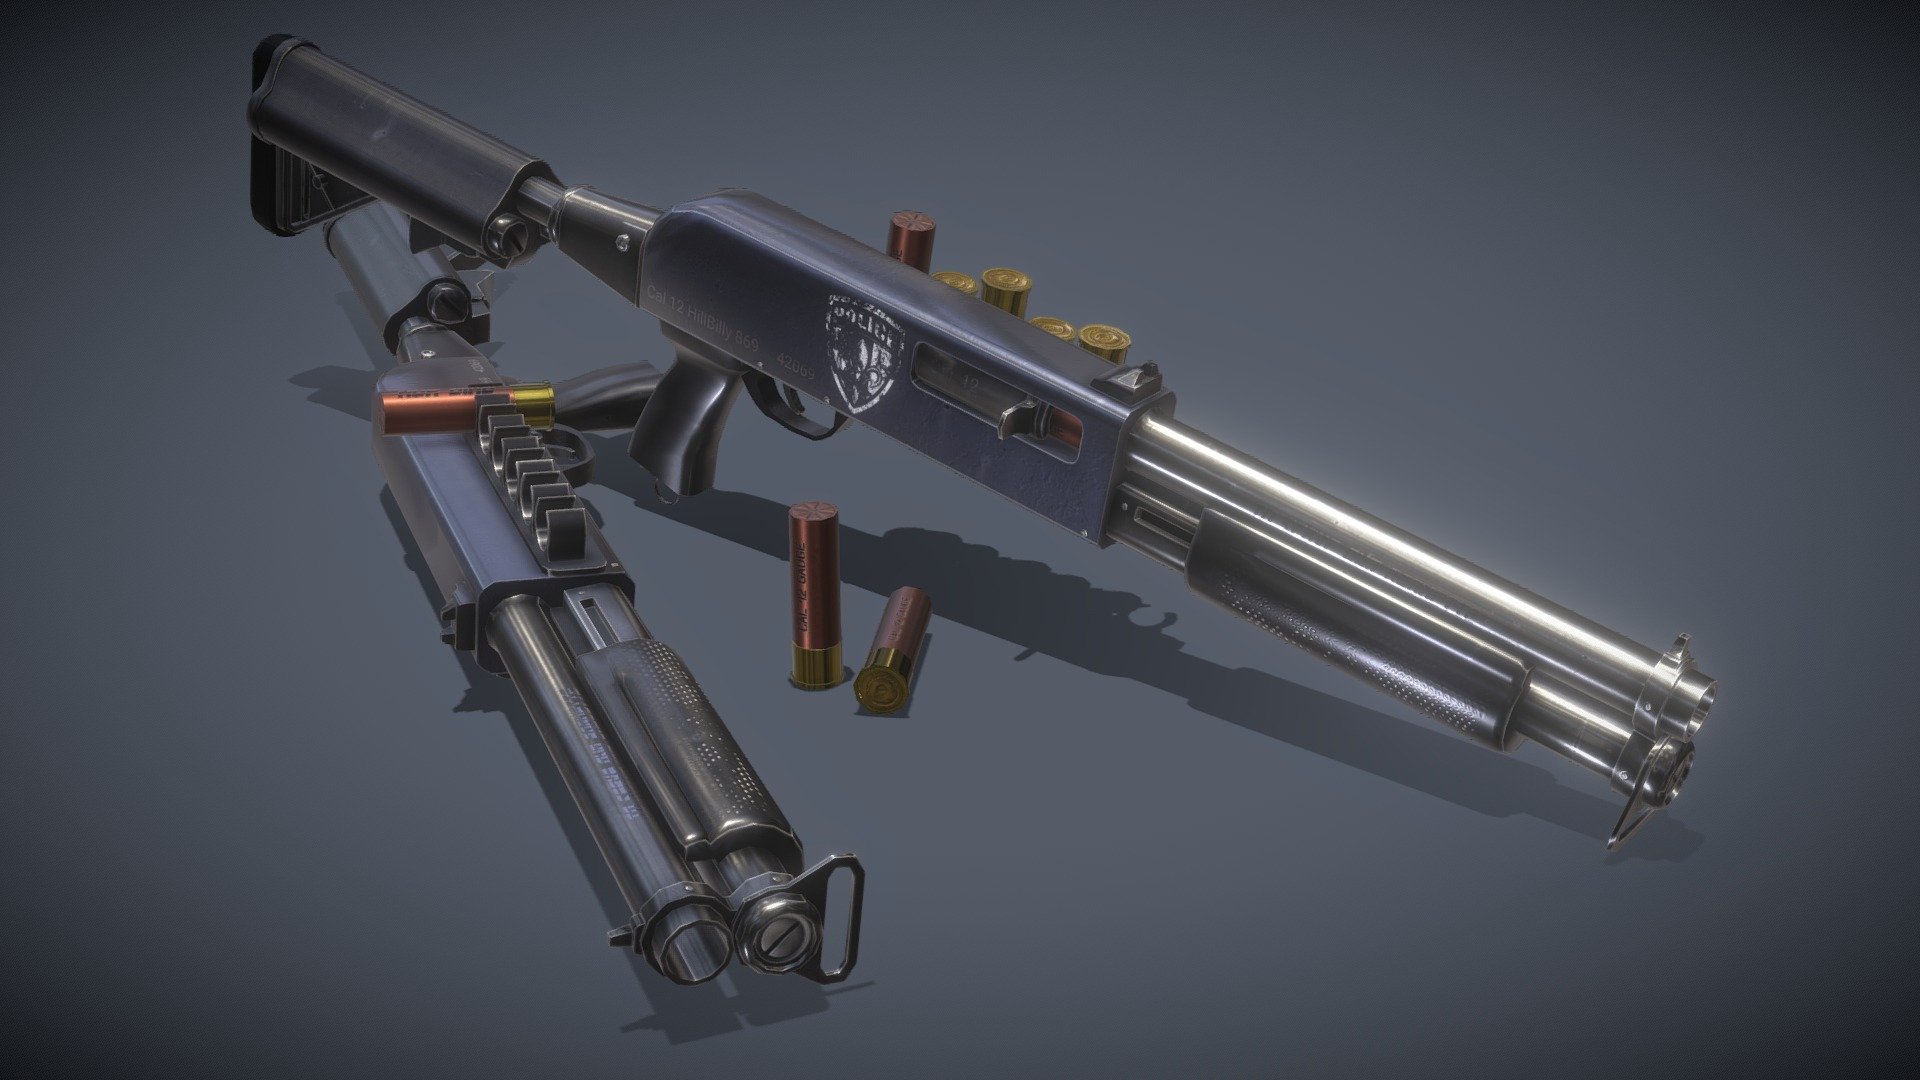 The Famous Shotgun used in a large panel of countries.

– 3D Model close to the original but partially reinterpreted 
– Proportions are partially respected compared to the original weapon 
– Optimised for Game engine (Tested on Unity 3D) 
– Some parts are separated from the main model for a better 3D animation usecase.

Made with Cinema 4D Textured with ArmorPaint

//////////////// Model informations //////////////// 
– Points : 7486 
– Polygons : 7543
– Objects: 18 
- One material made of 4 Textures (20482048 px) for all the model  (Albedo (base), Normal, Metal, Rough*) - Hillbilly 869 Shotgun Cal 12 - 3D model by Gwenaël Hervé (@Gwenael_Herve) 3d model